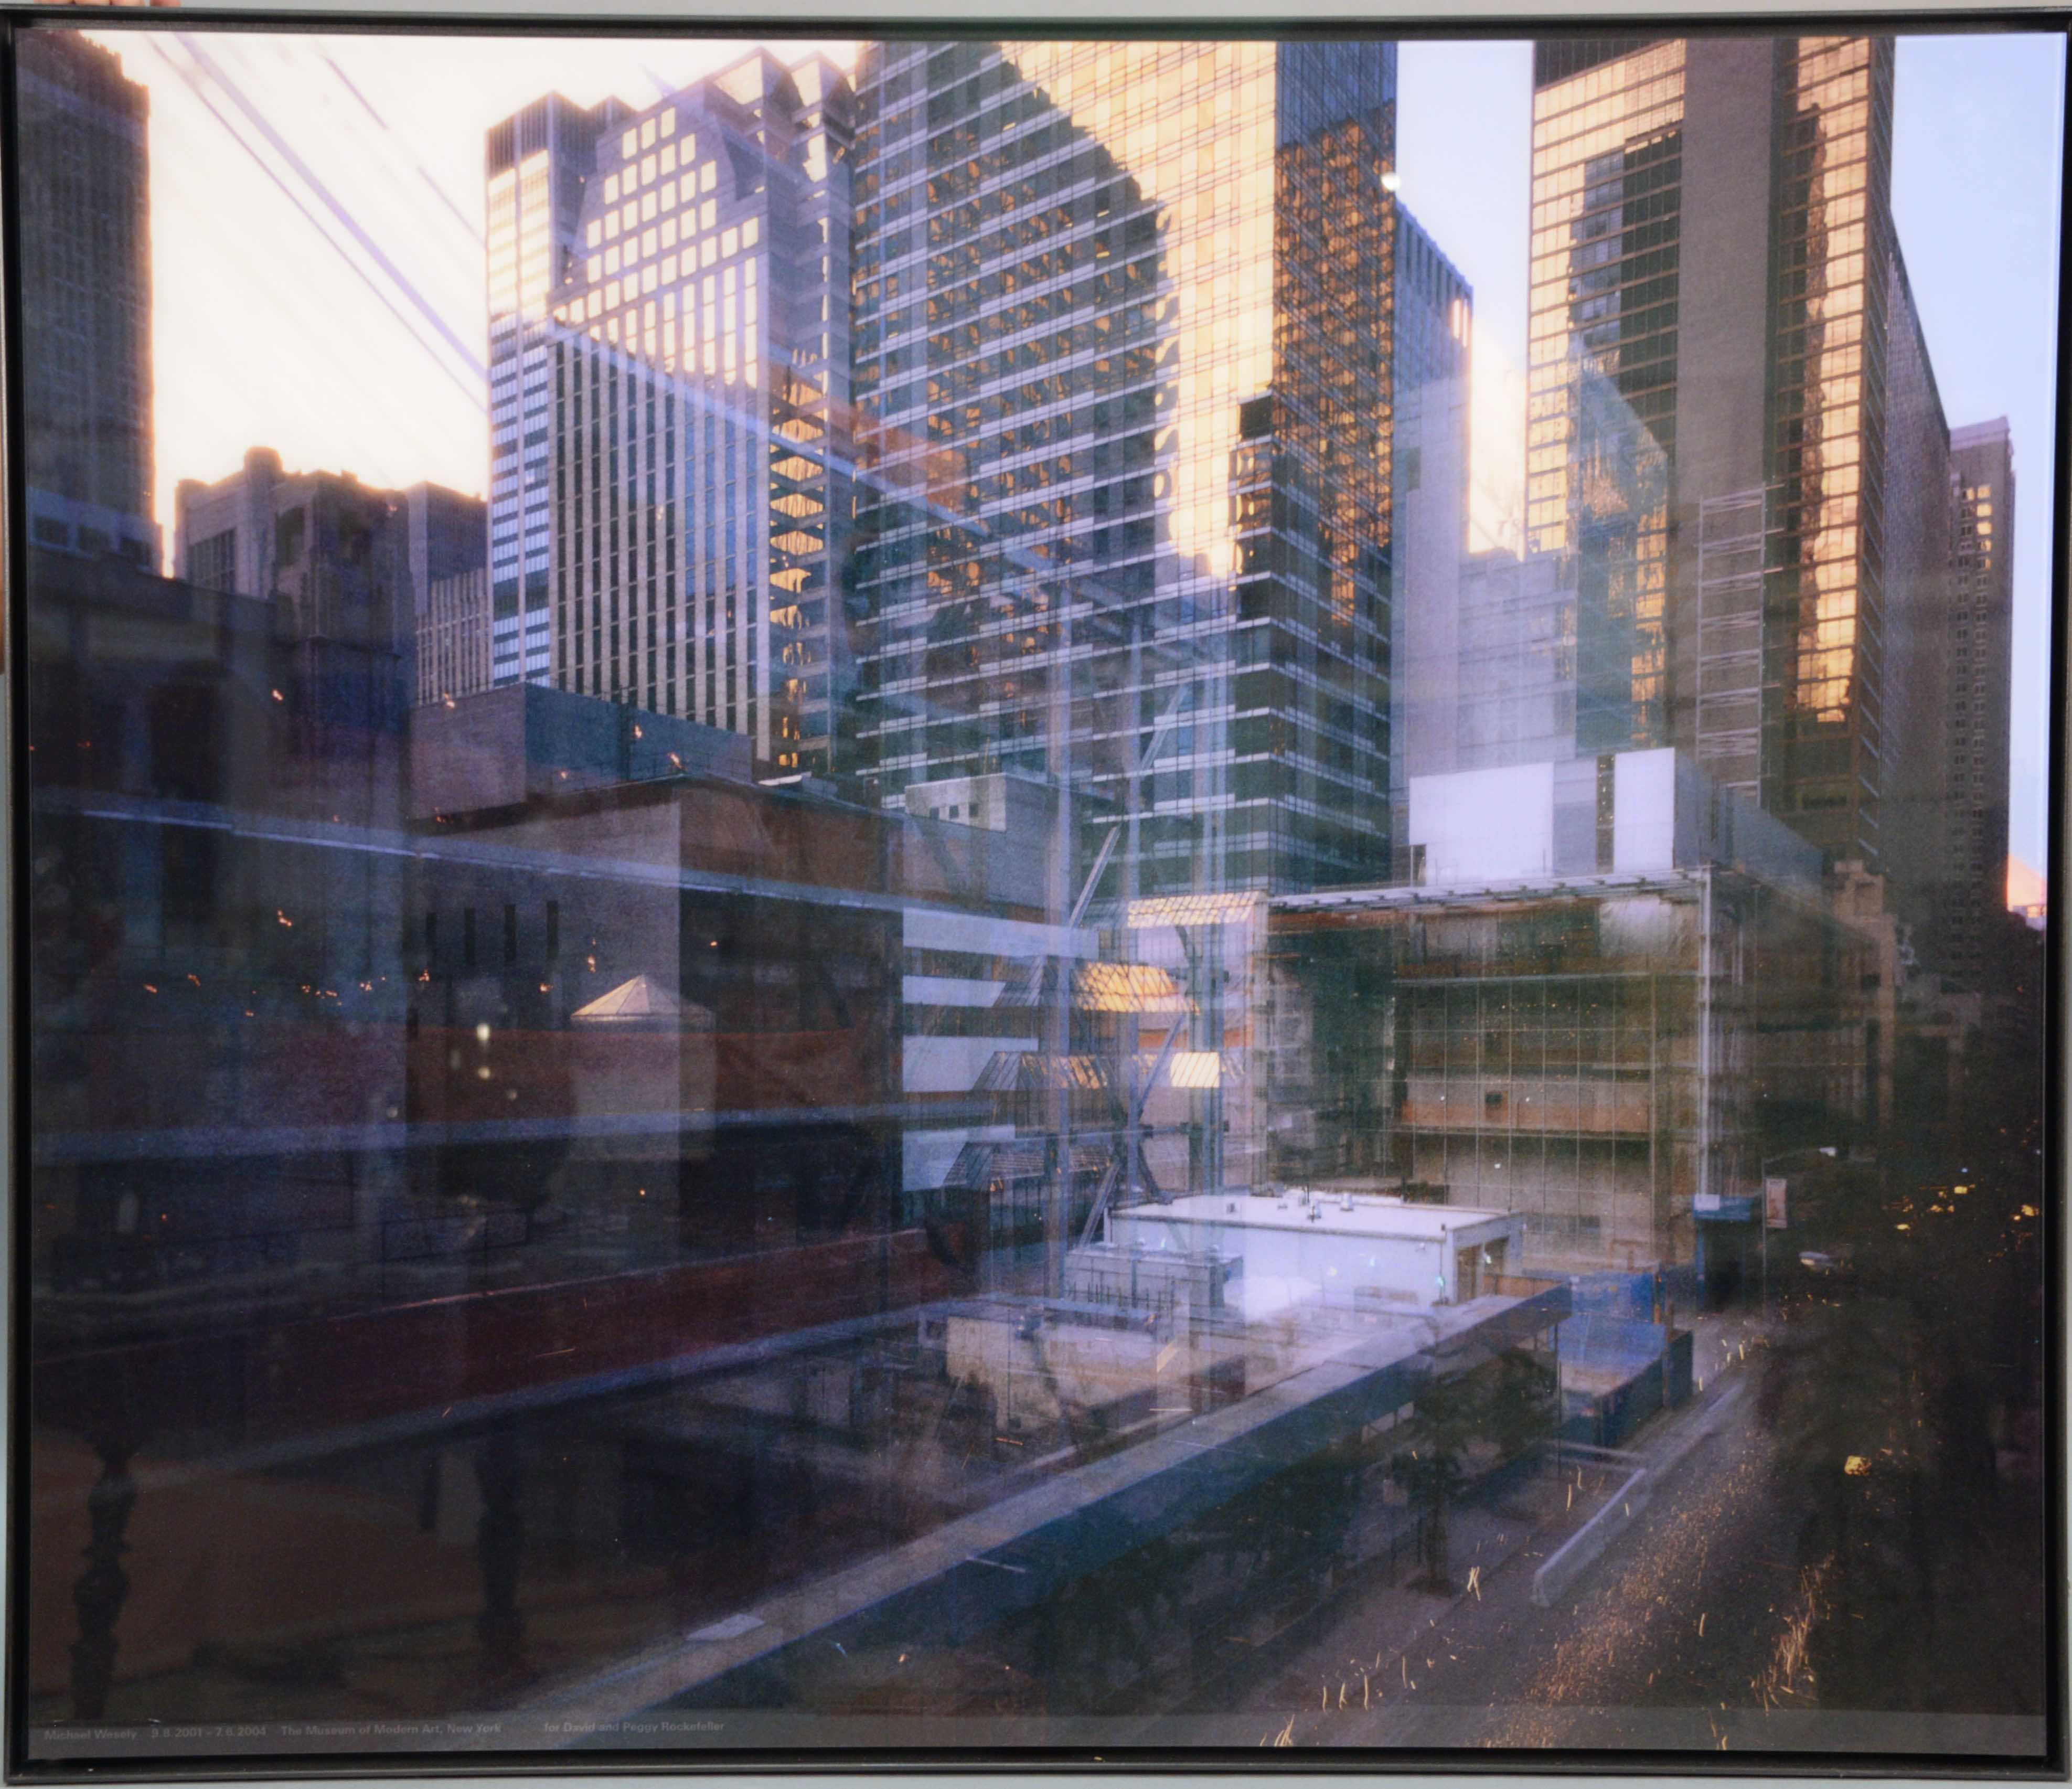 Michael Wesely (b. 1963), photo of MoMA under construction, estimated at $4,000-8,000.